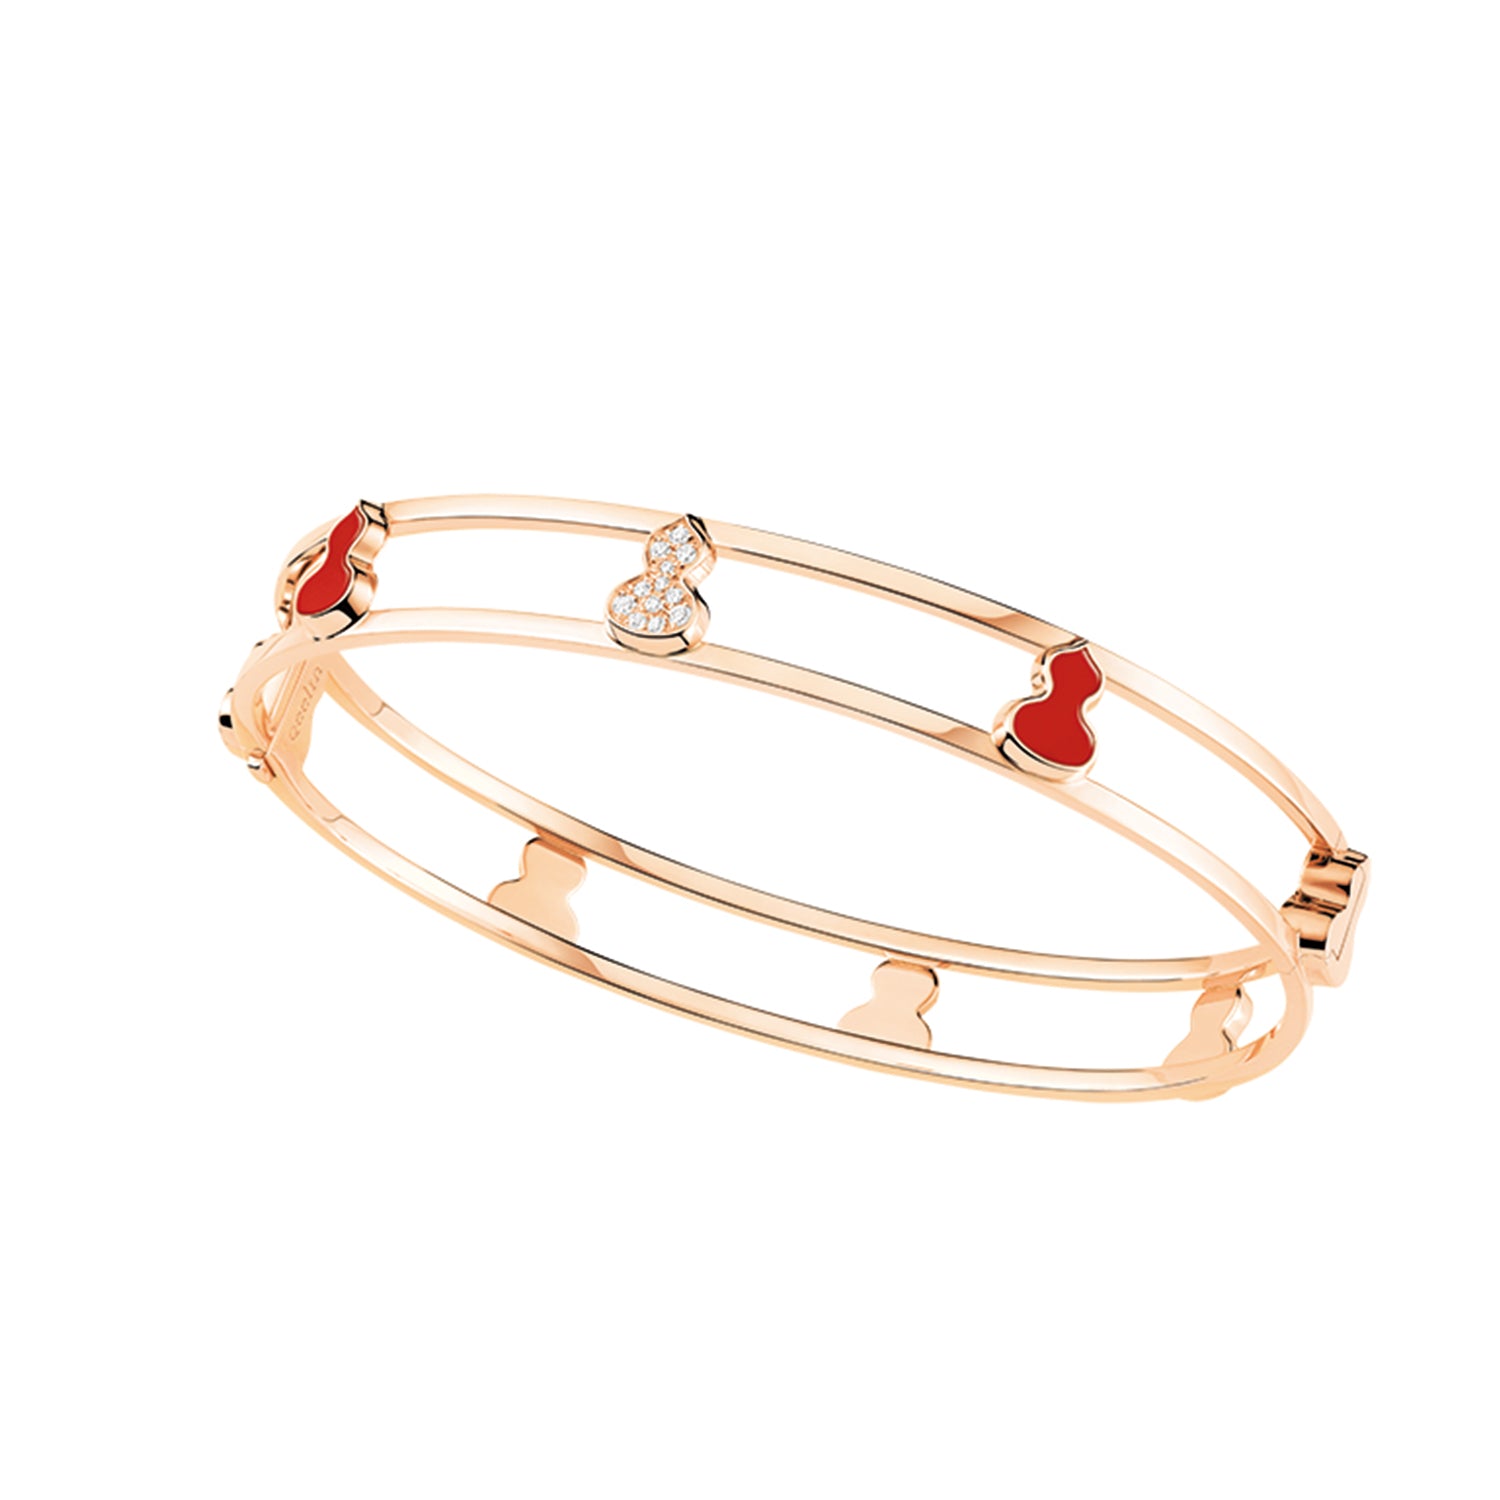 Wulu bangle in 18K rose gold with diamonds and red agate